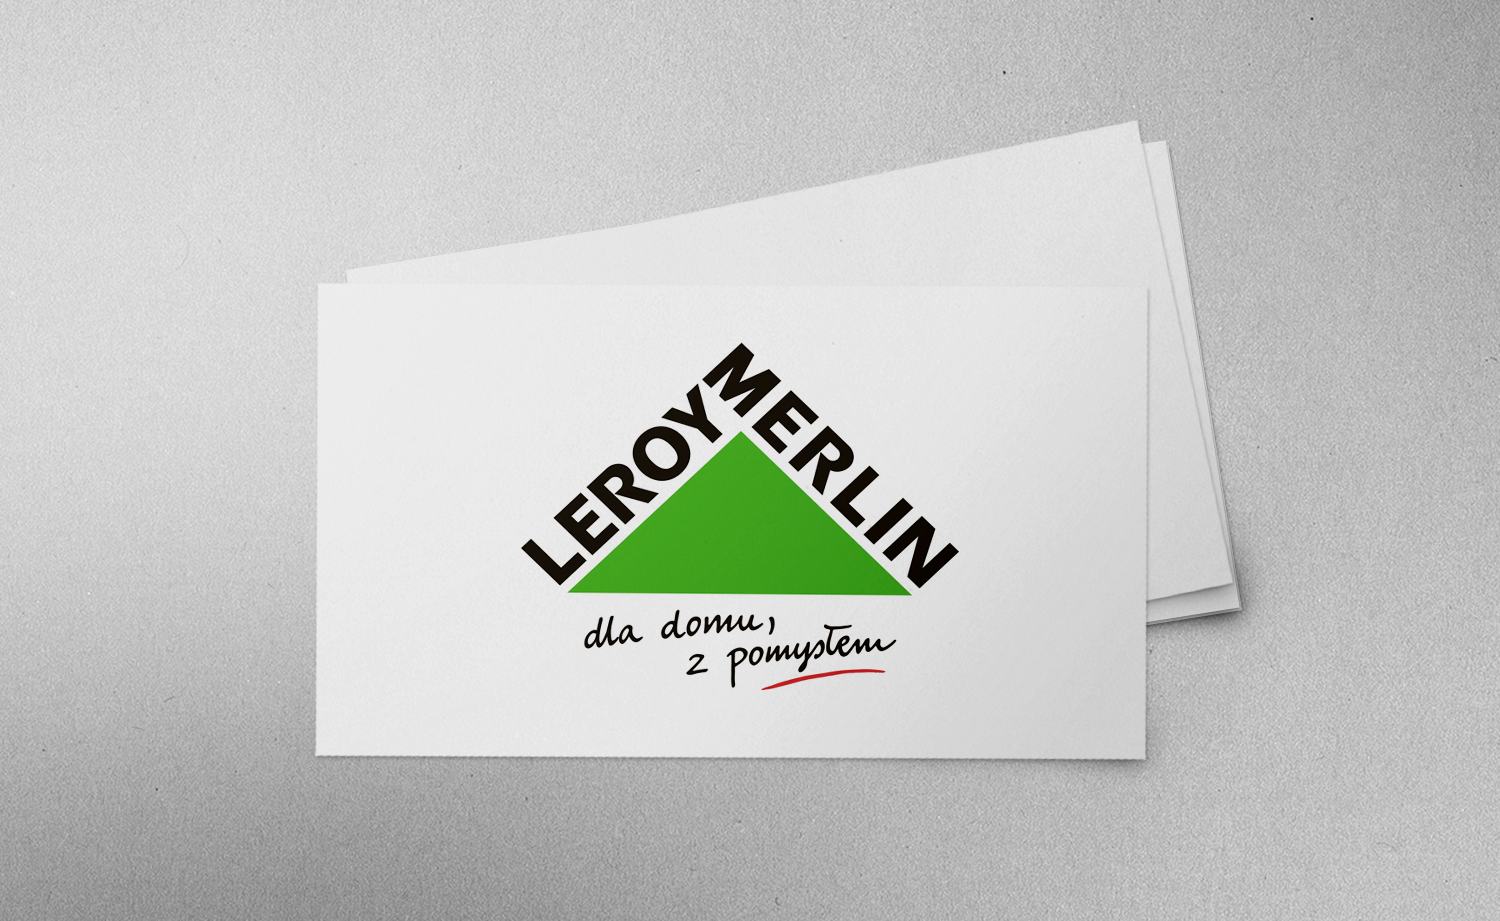 Another mailing creations for Leroy Merlin